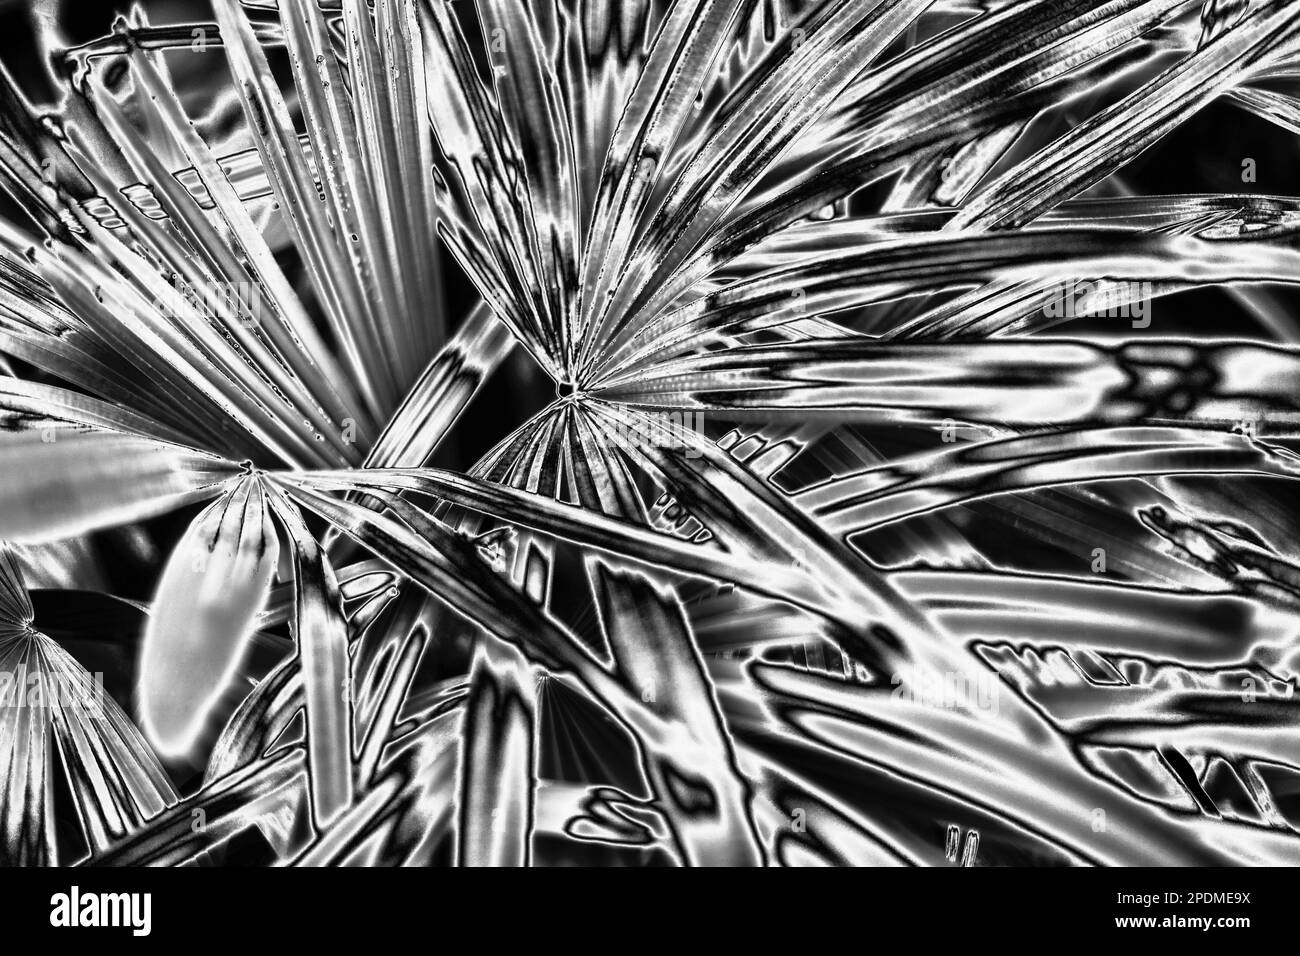 Silver palm tree leaves background, silver flower leaf texture, gray metal tropical foliage backdrop, black white metallic floral branch pattern Stock Photo